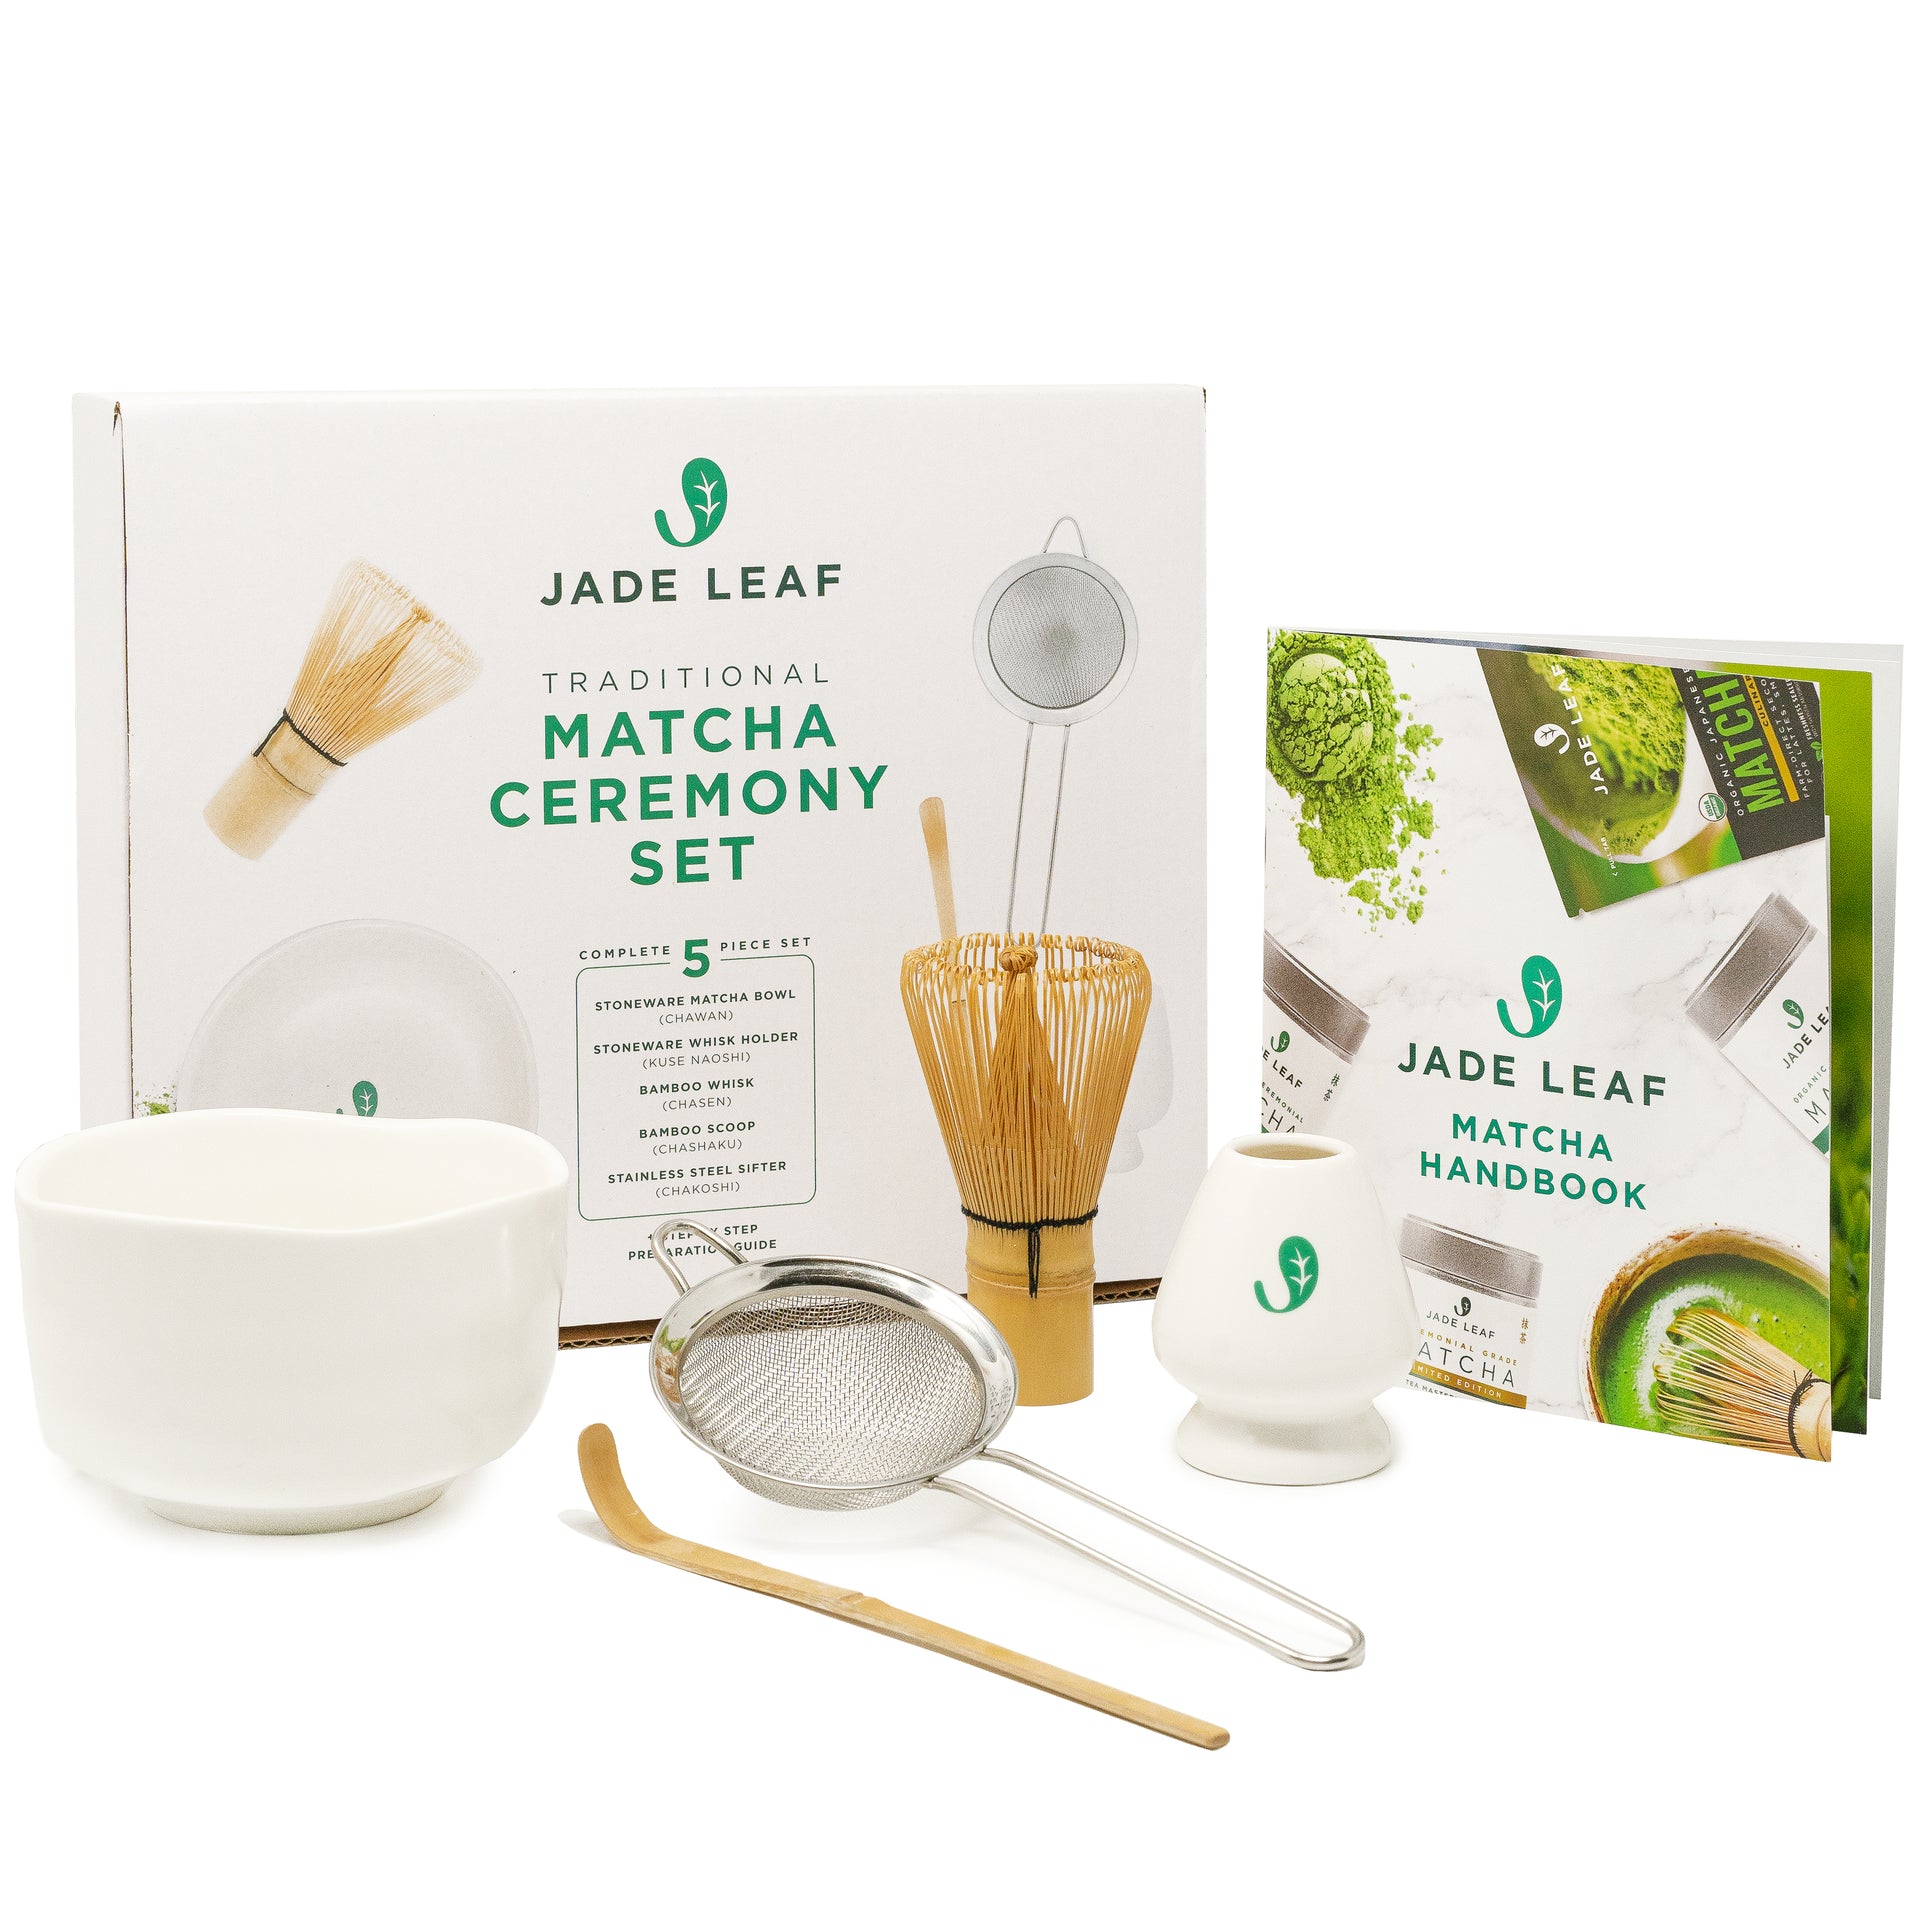 JADE LEAF Modern Matcha Starter Set - Electric Whisk Frother, Stainless  Steel Spoon, Stainless Steel Sifter, Printed Handbook